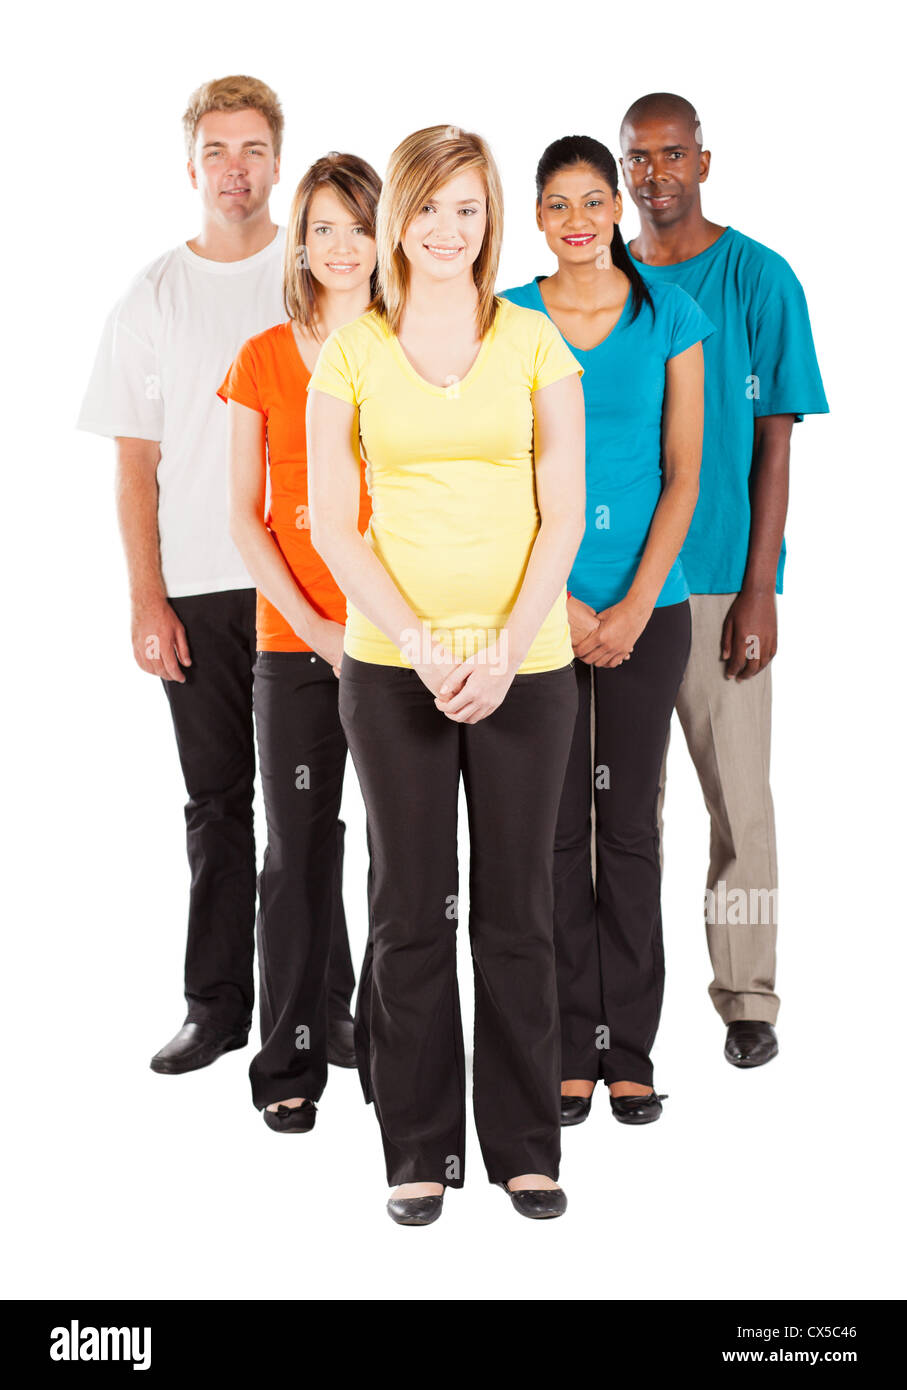 full length portrait of group of diverse people Stock Photo